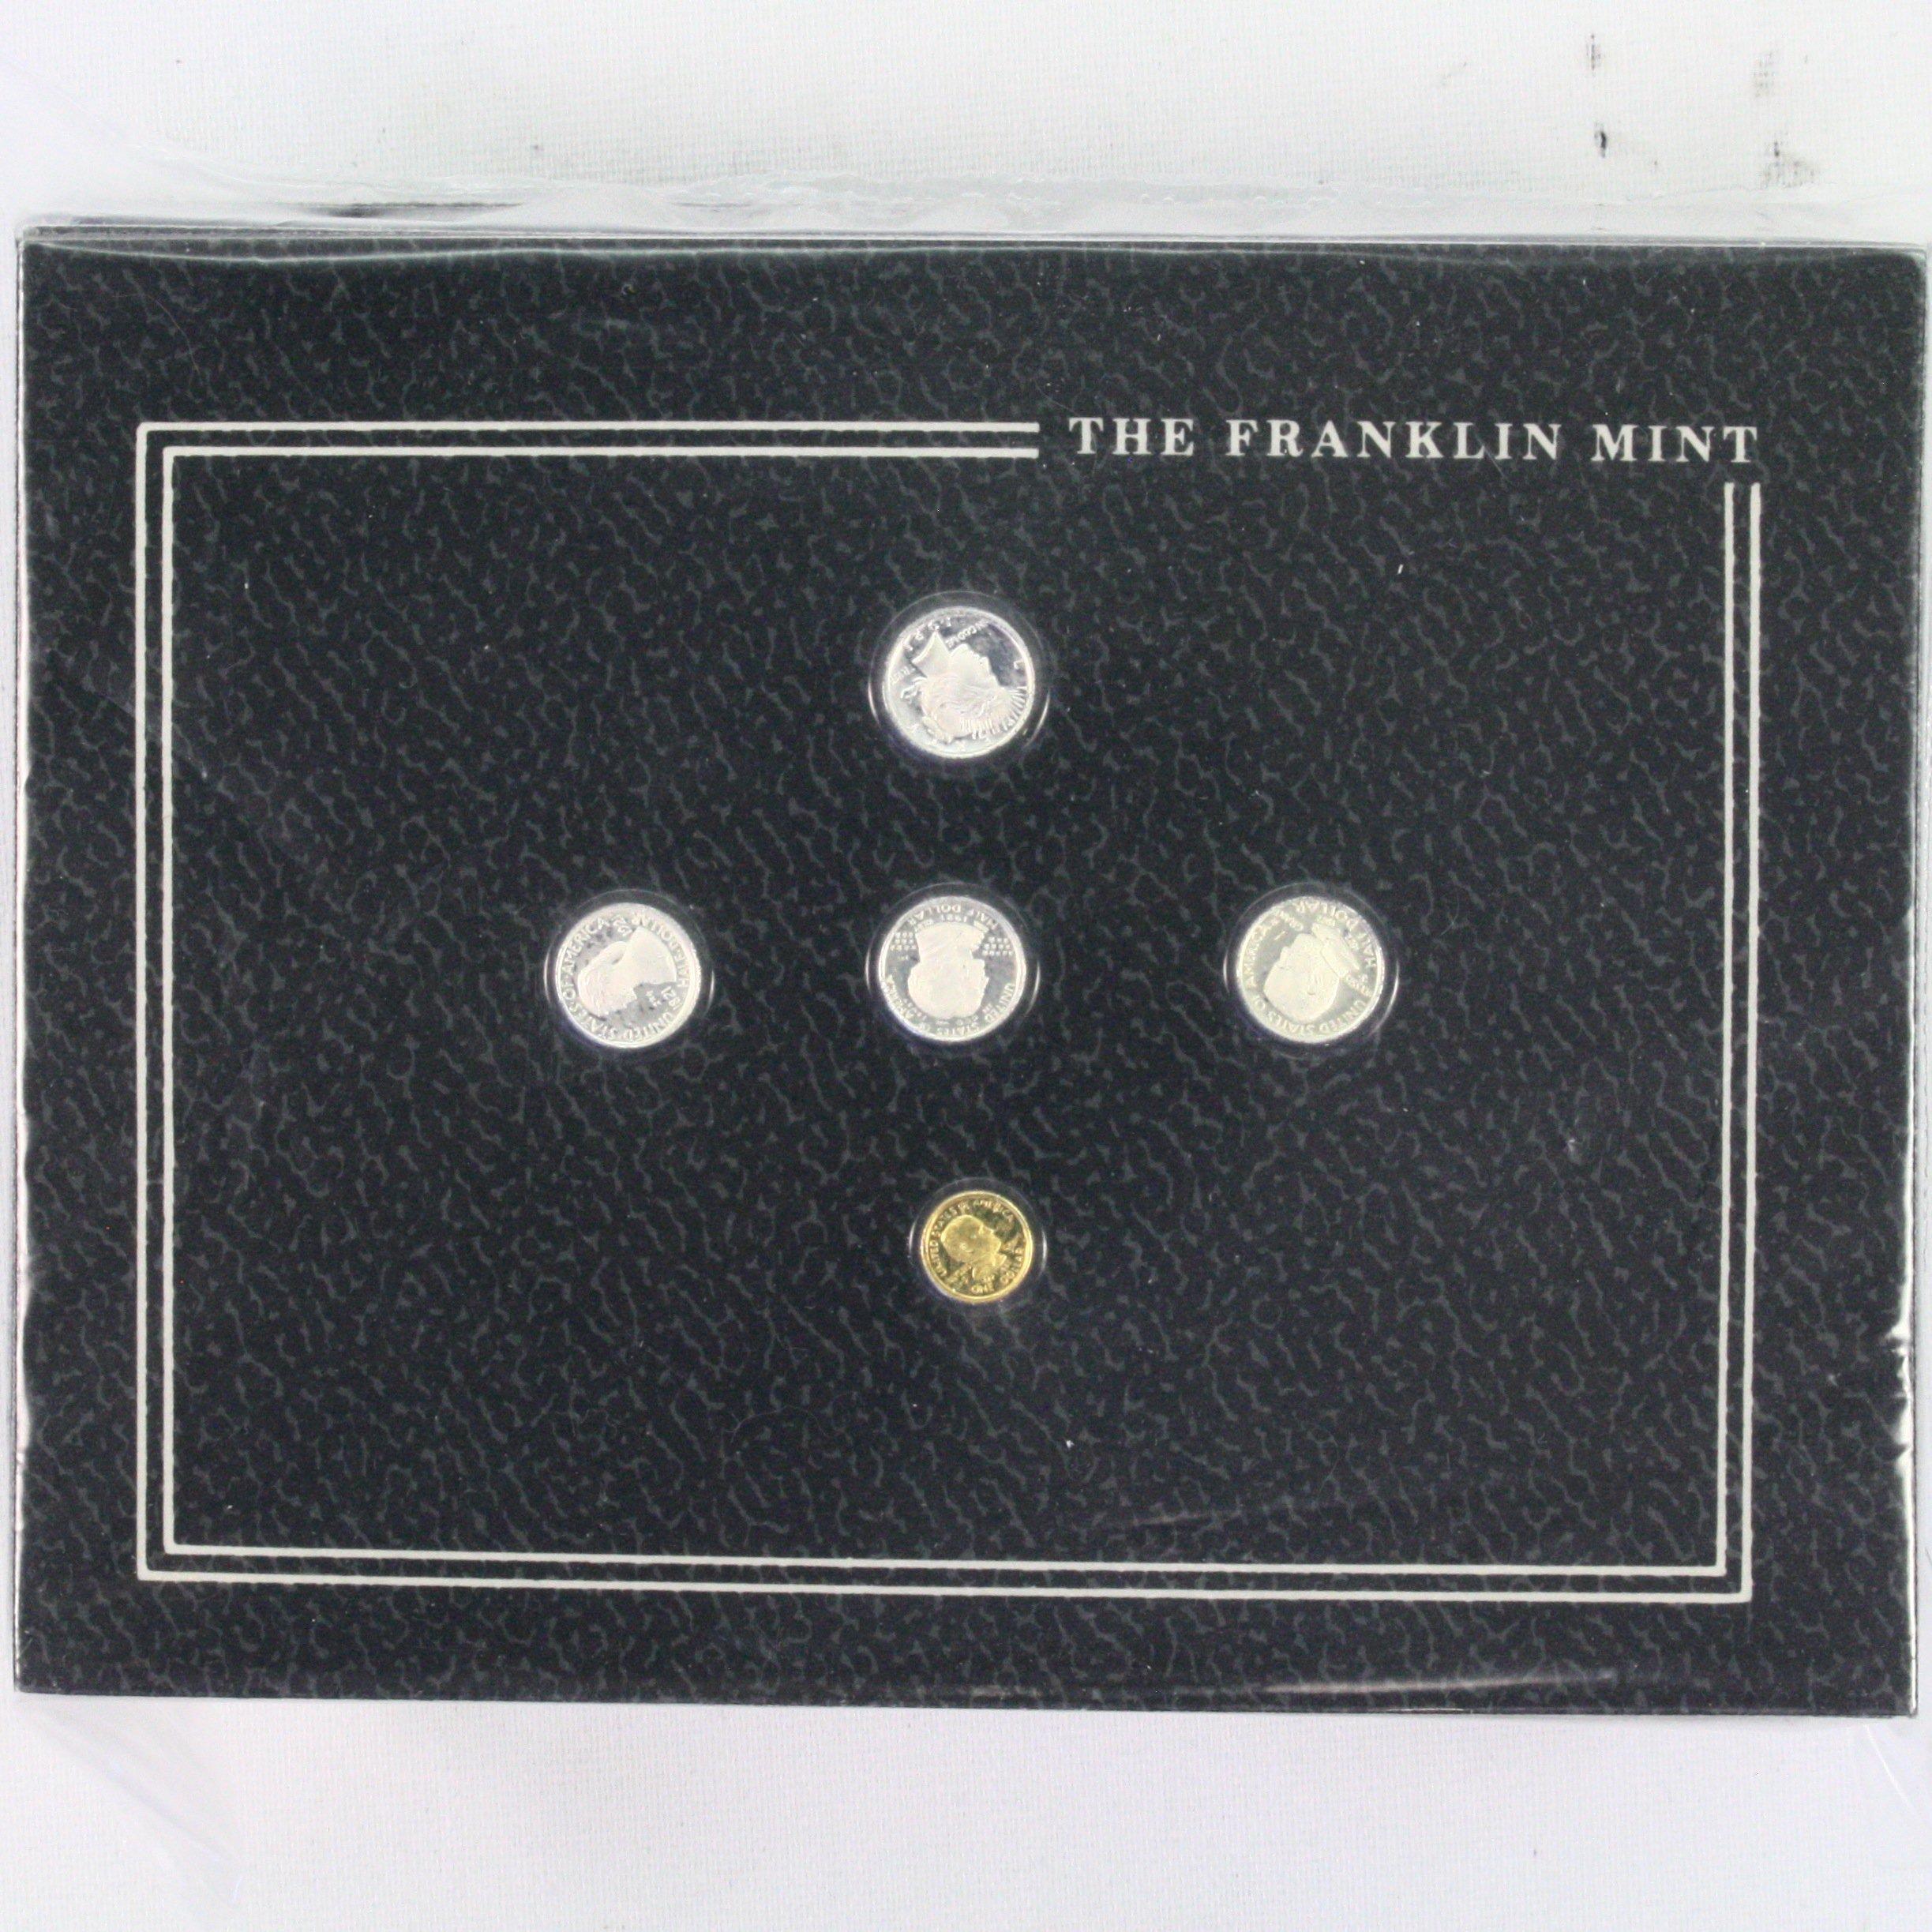 1981 Franklin Mint 114-piece miniature coins of the United States replicas